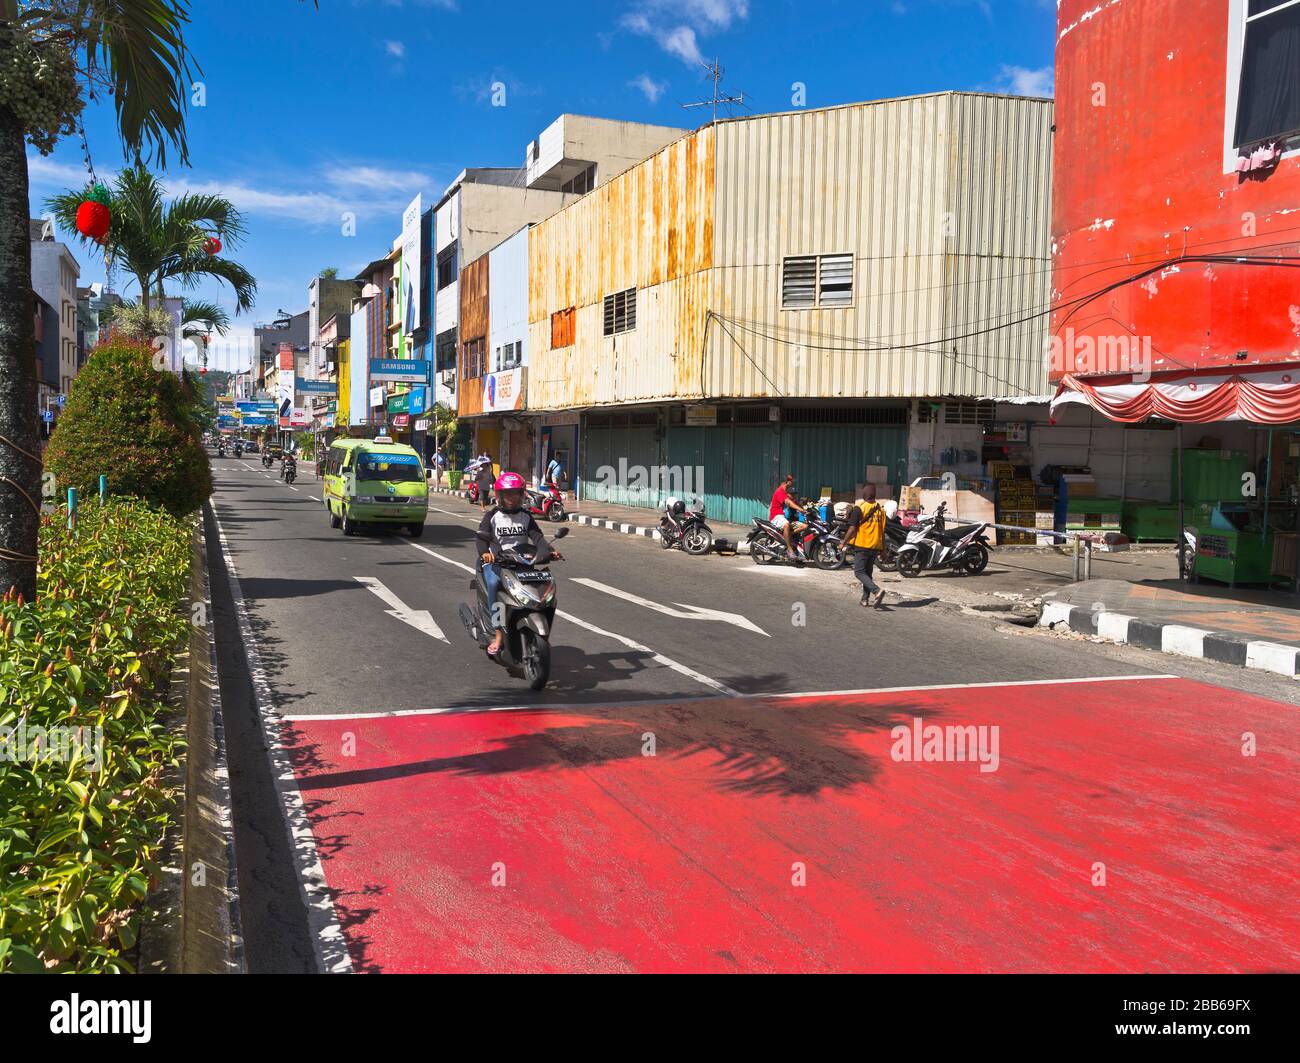 dh indonesian city traffic AMBON MALUKU INDONESIA Street buildings motorbike road on scooter Stock Photo